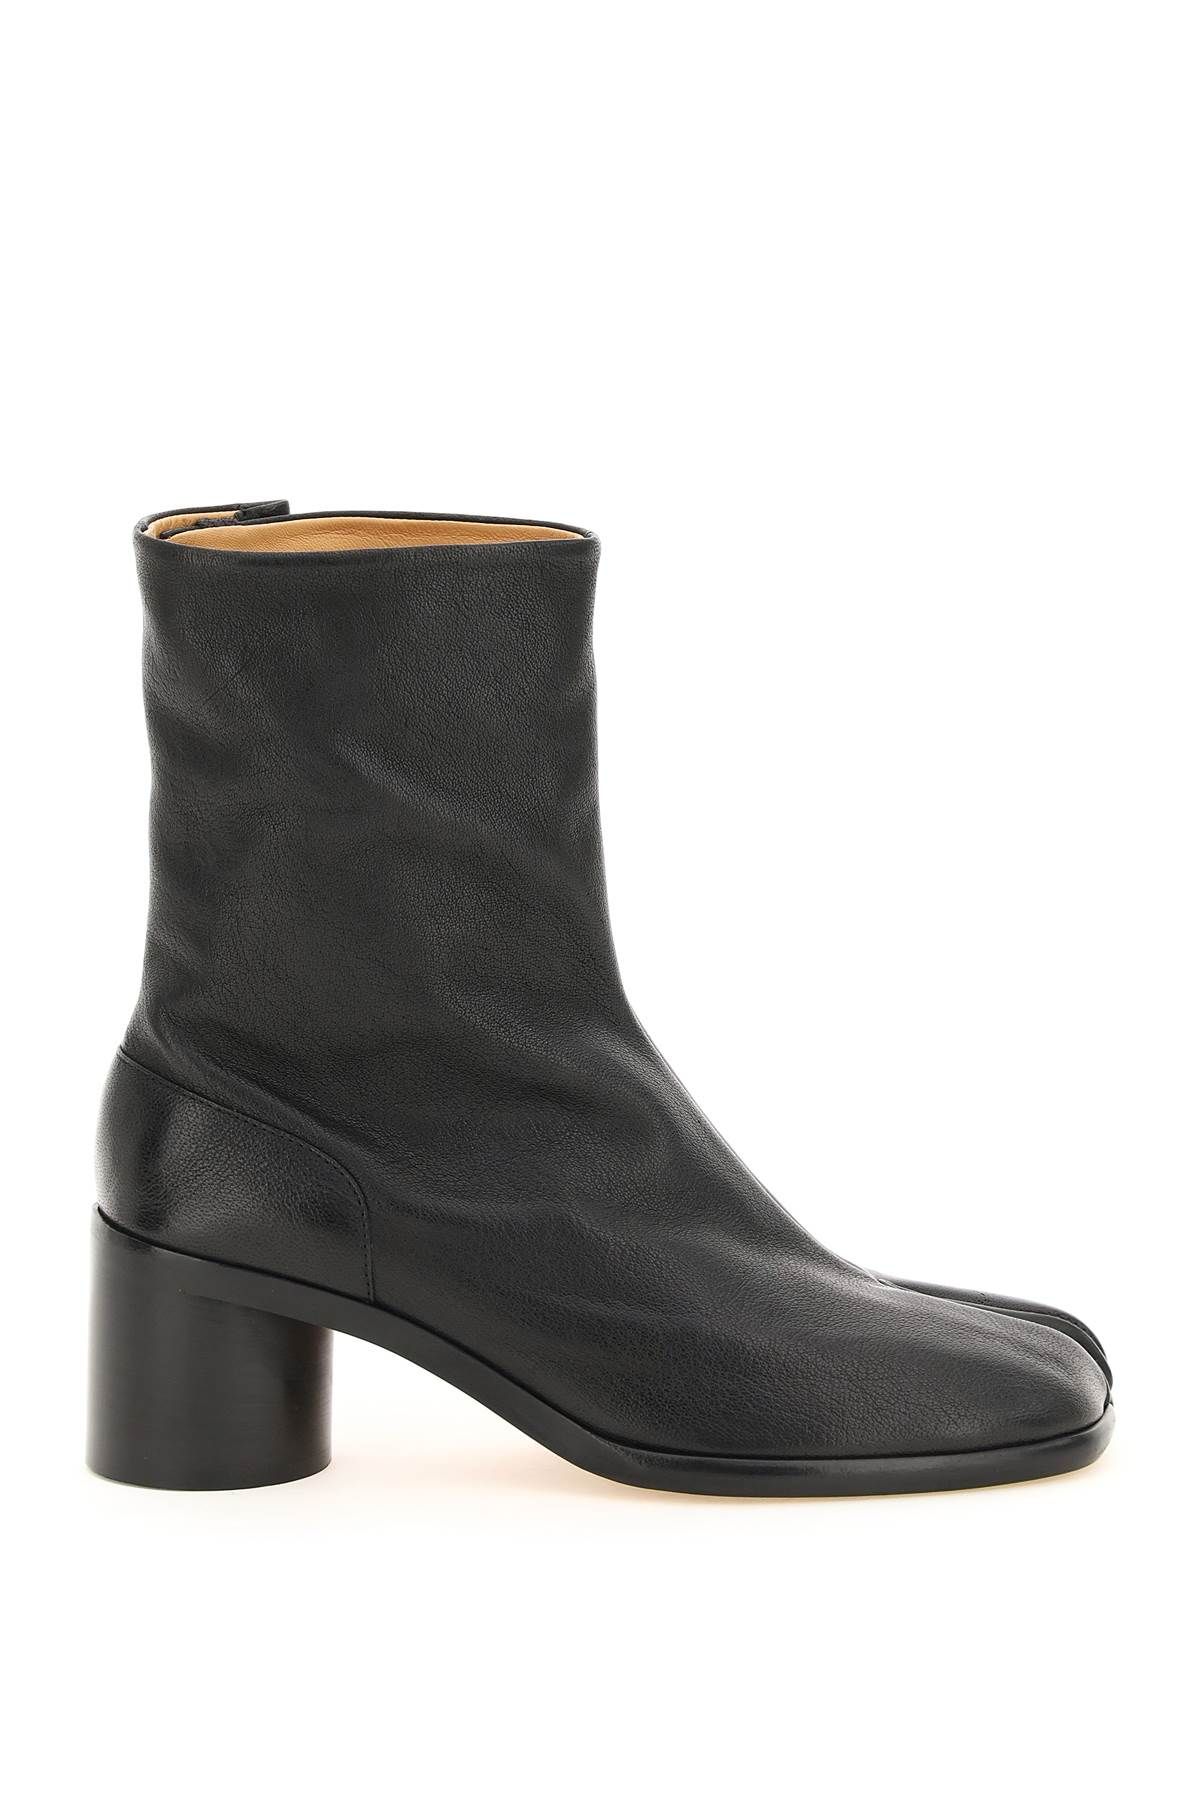 Pre-owned Maison Margiela Tabi Ankle Boots In Black